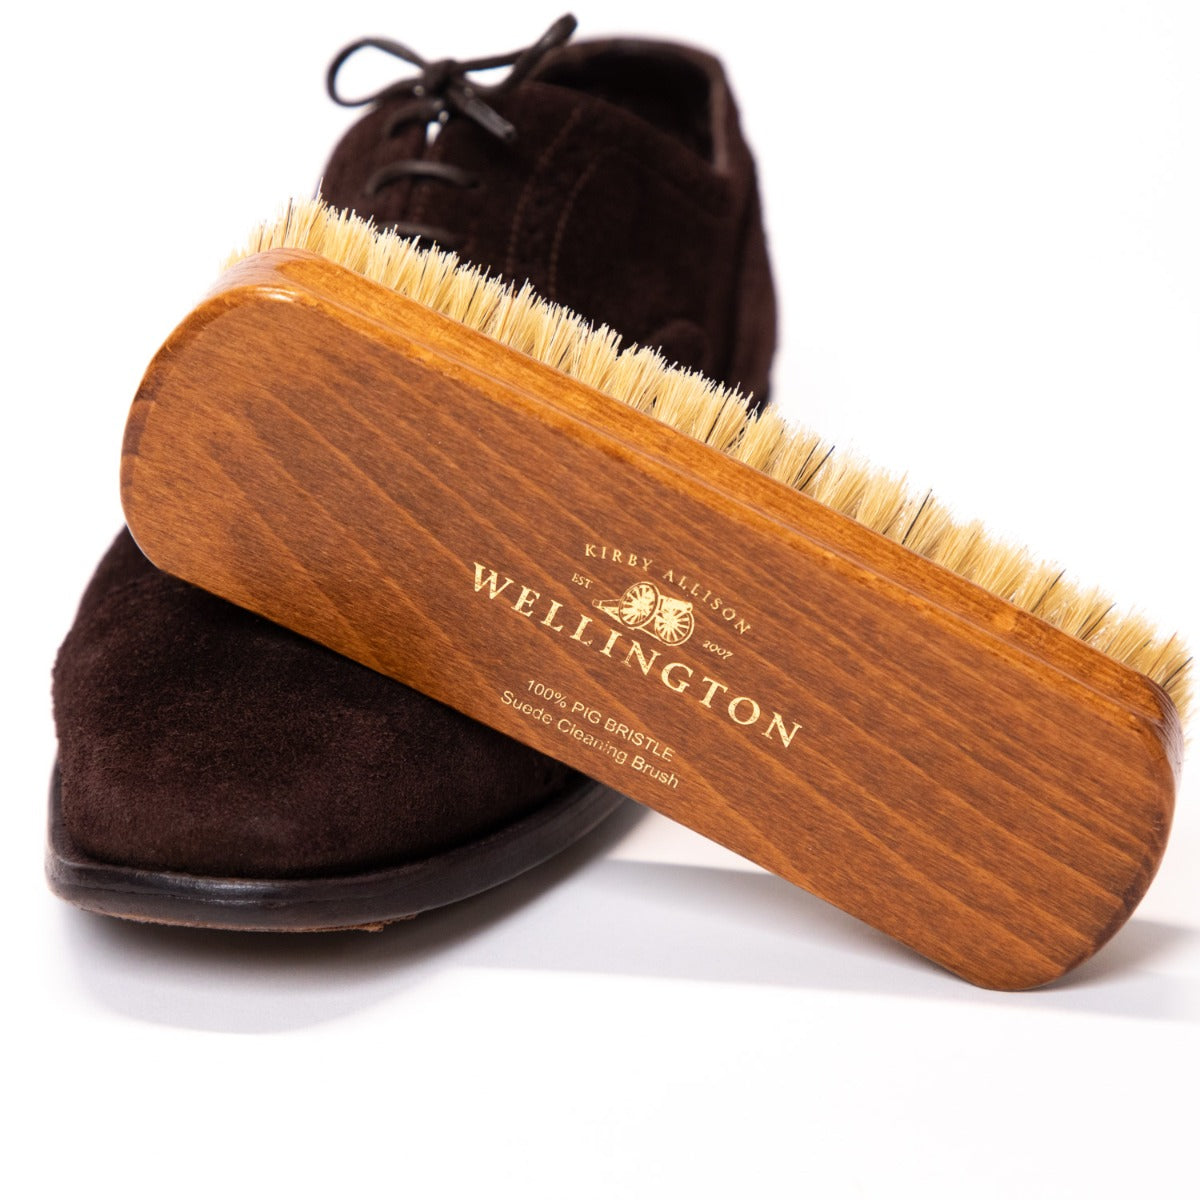 A Wellington Deluxe Pig Bristle Suede Cleaning Brush from KirbyAllison.com.